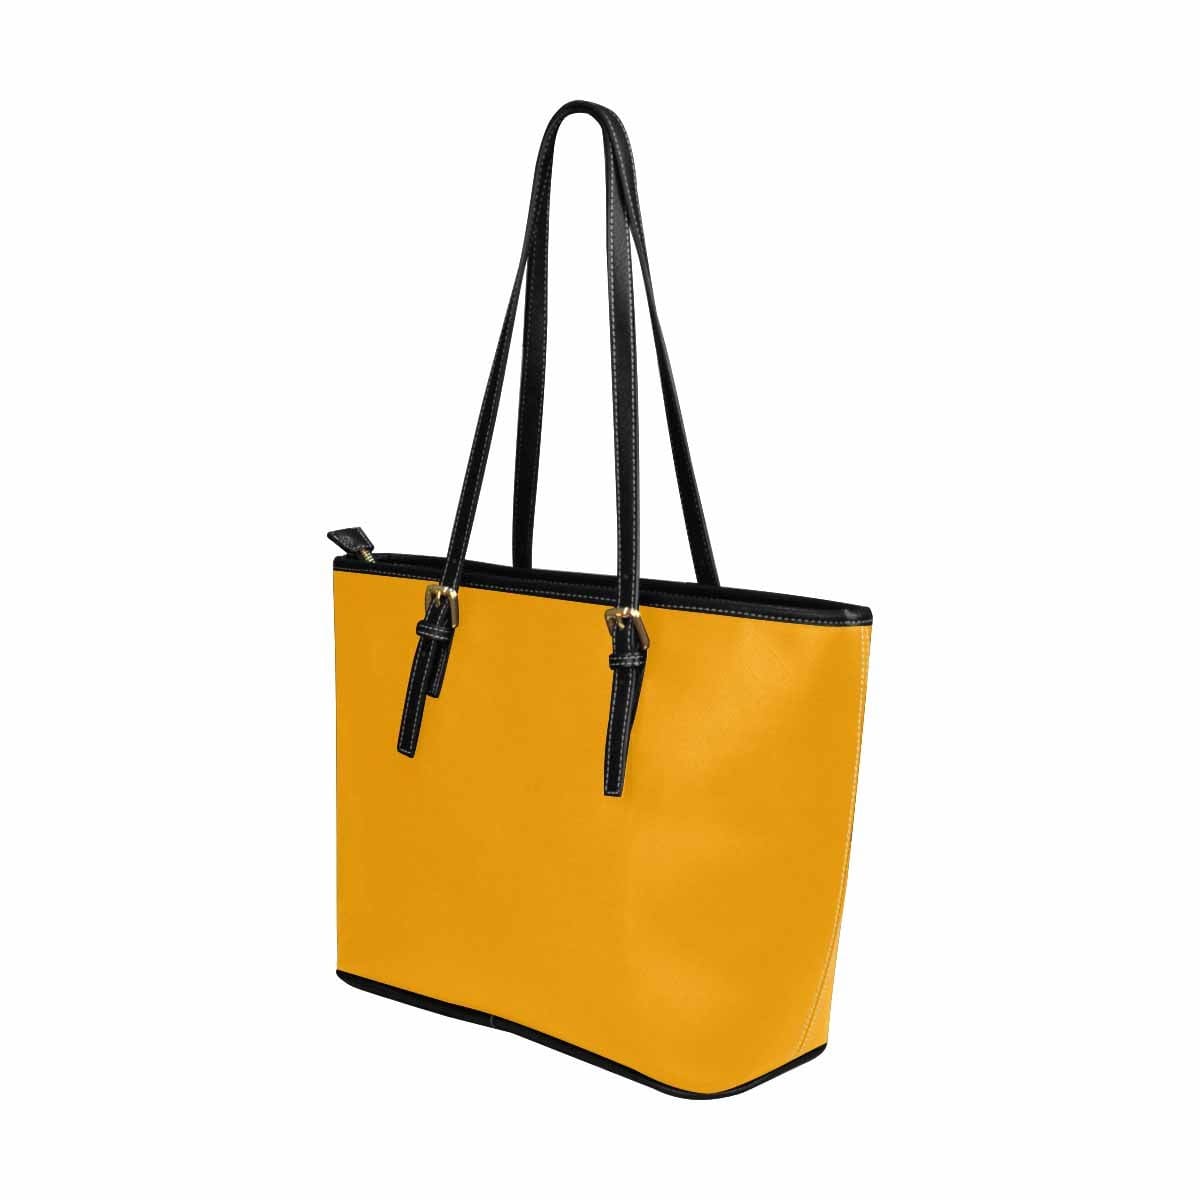 Large Leather Tote Shoulder Bag - Bright Orange - Bags | Leather Tote Bags